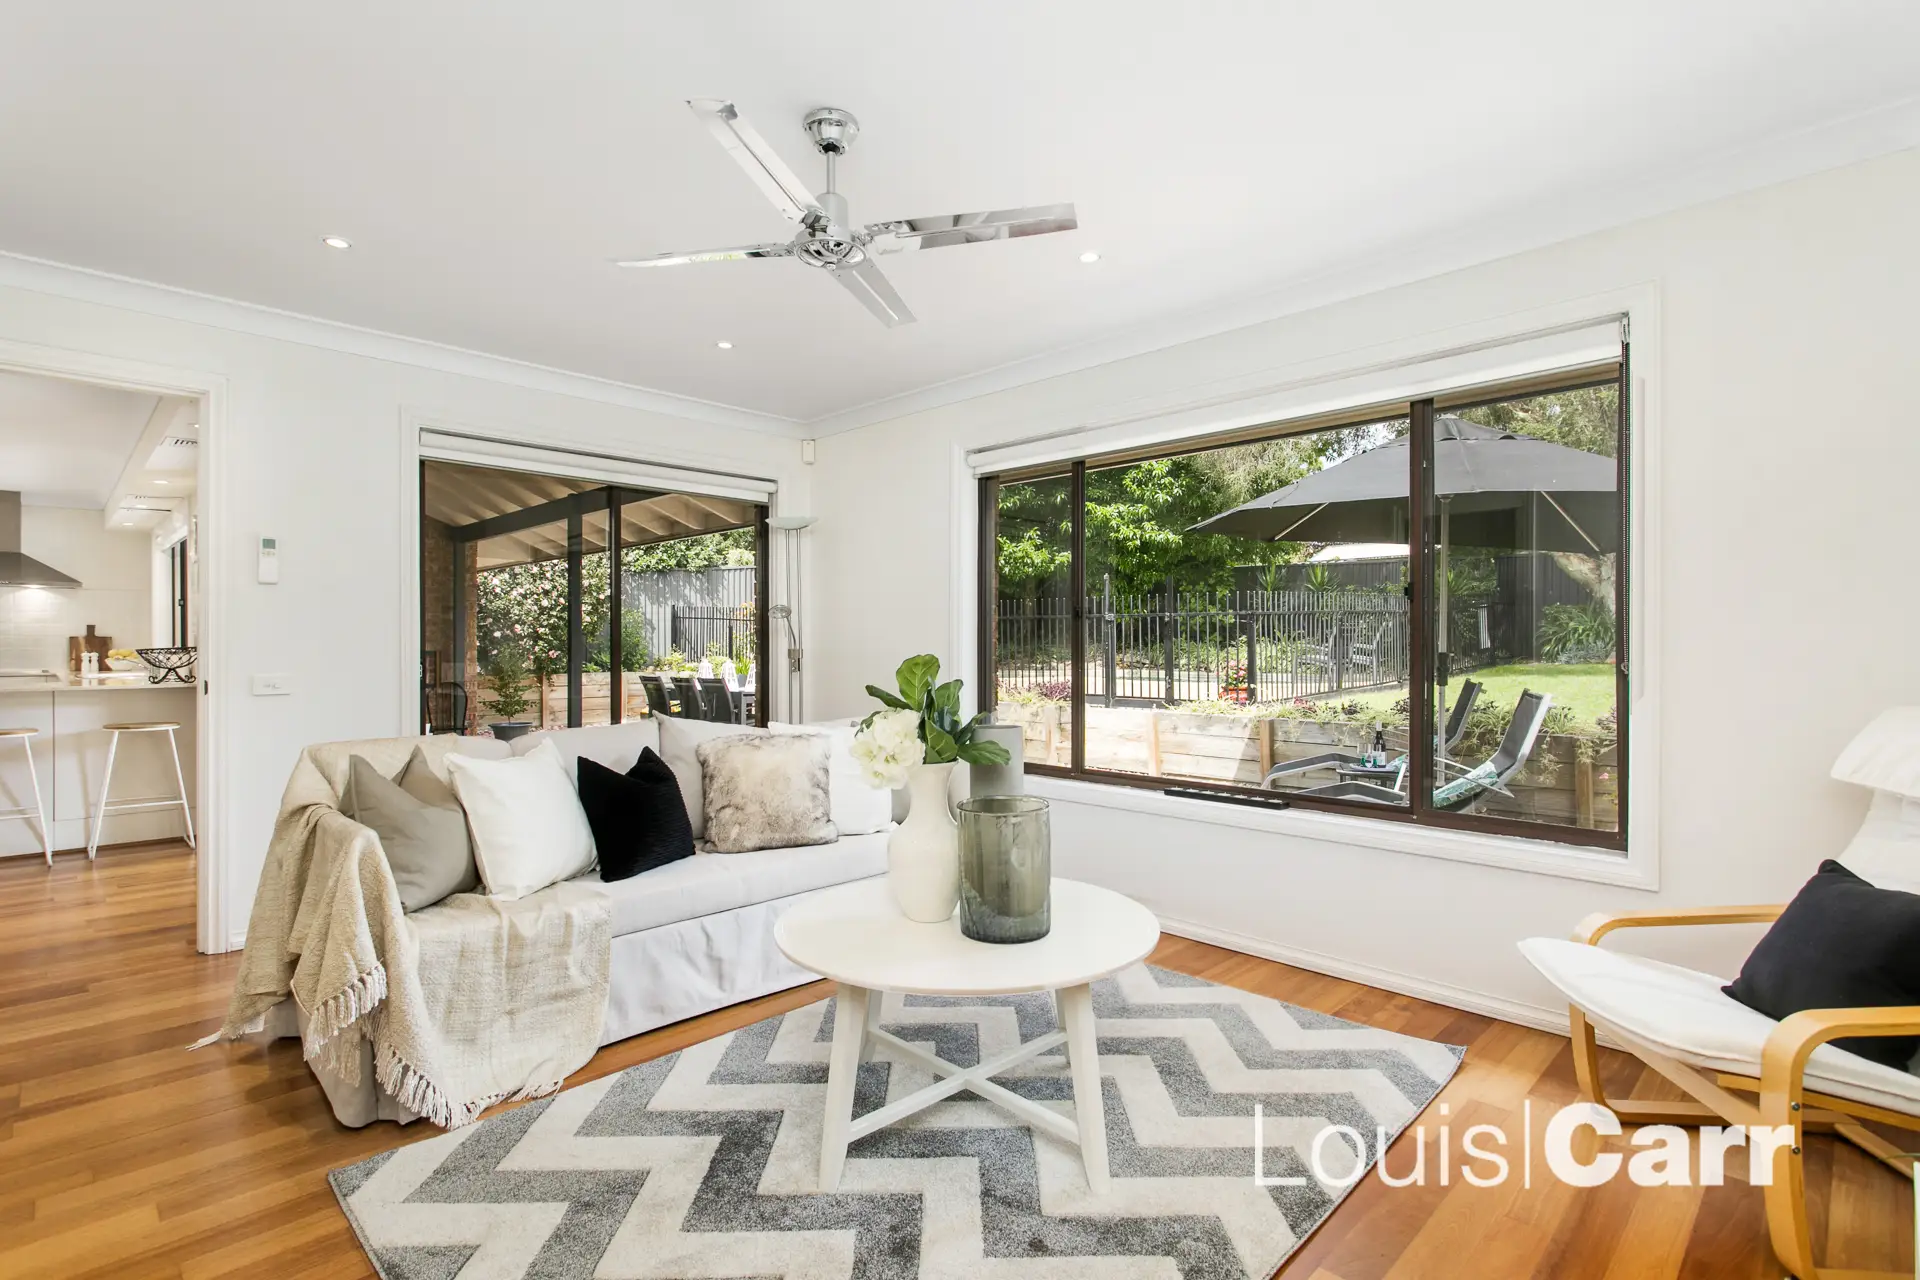 Photo #6: 27 Tallowwood Avenue, Cherrybrook - Sold by Louis Carr Real Estate